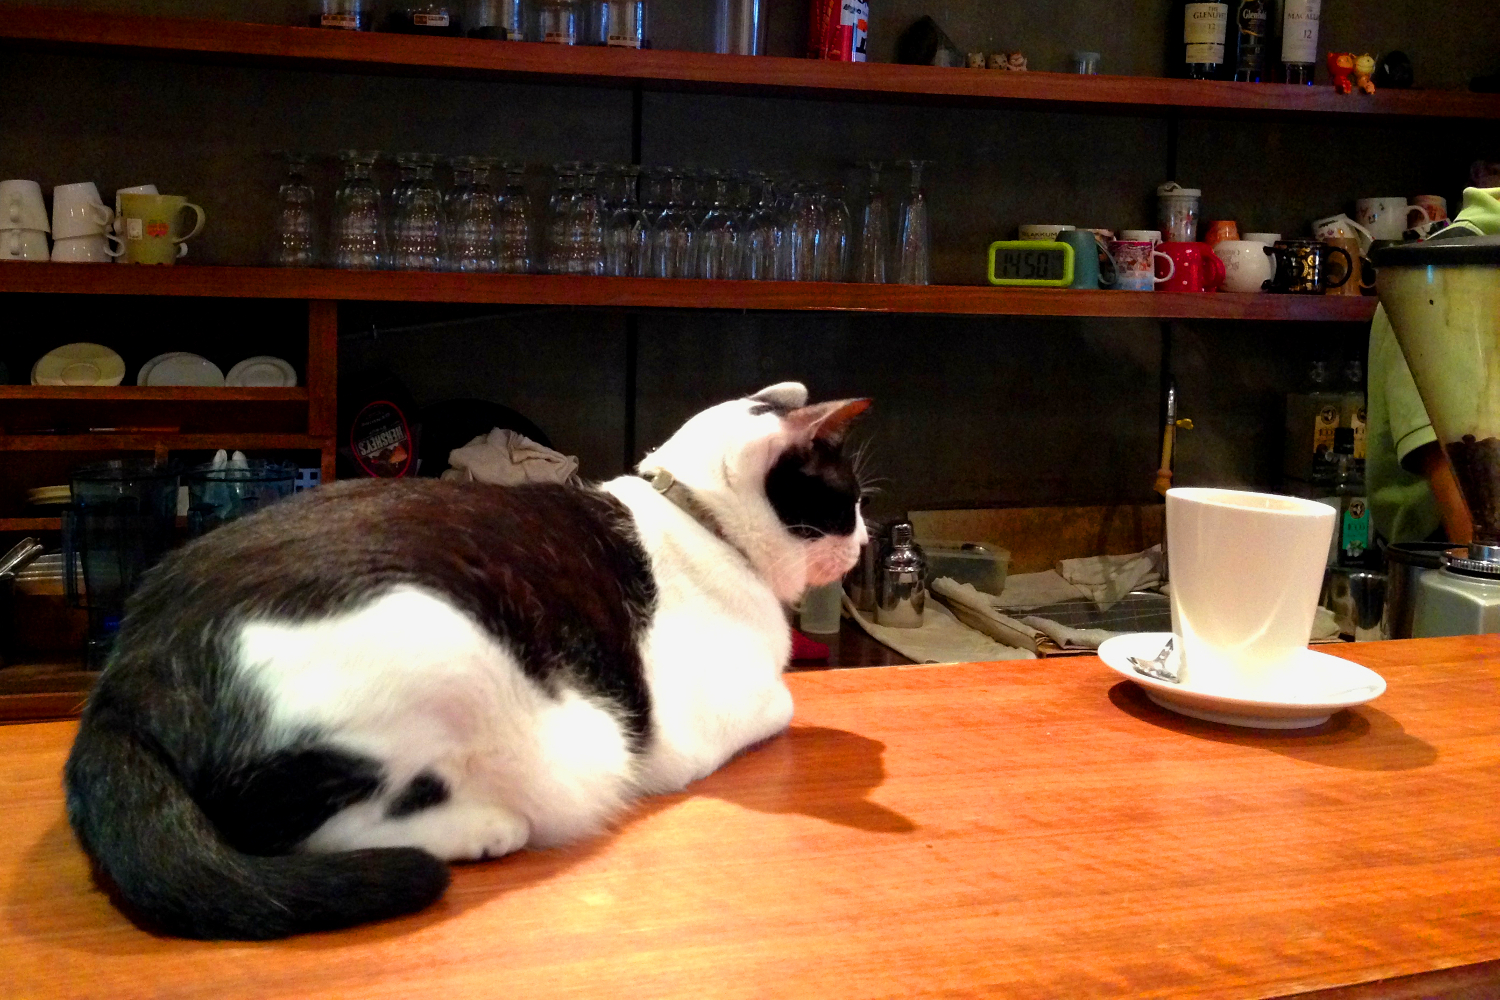 Quality control: cats oversee all at Minimal Cafe. Image by Dinah Gardner / Lonely Planet